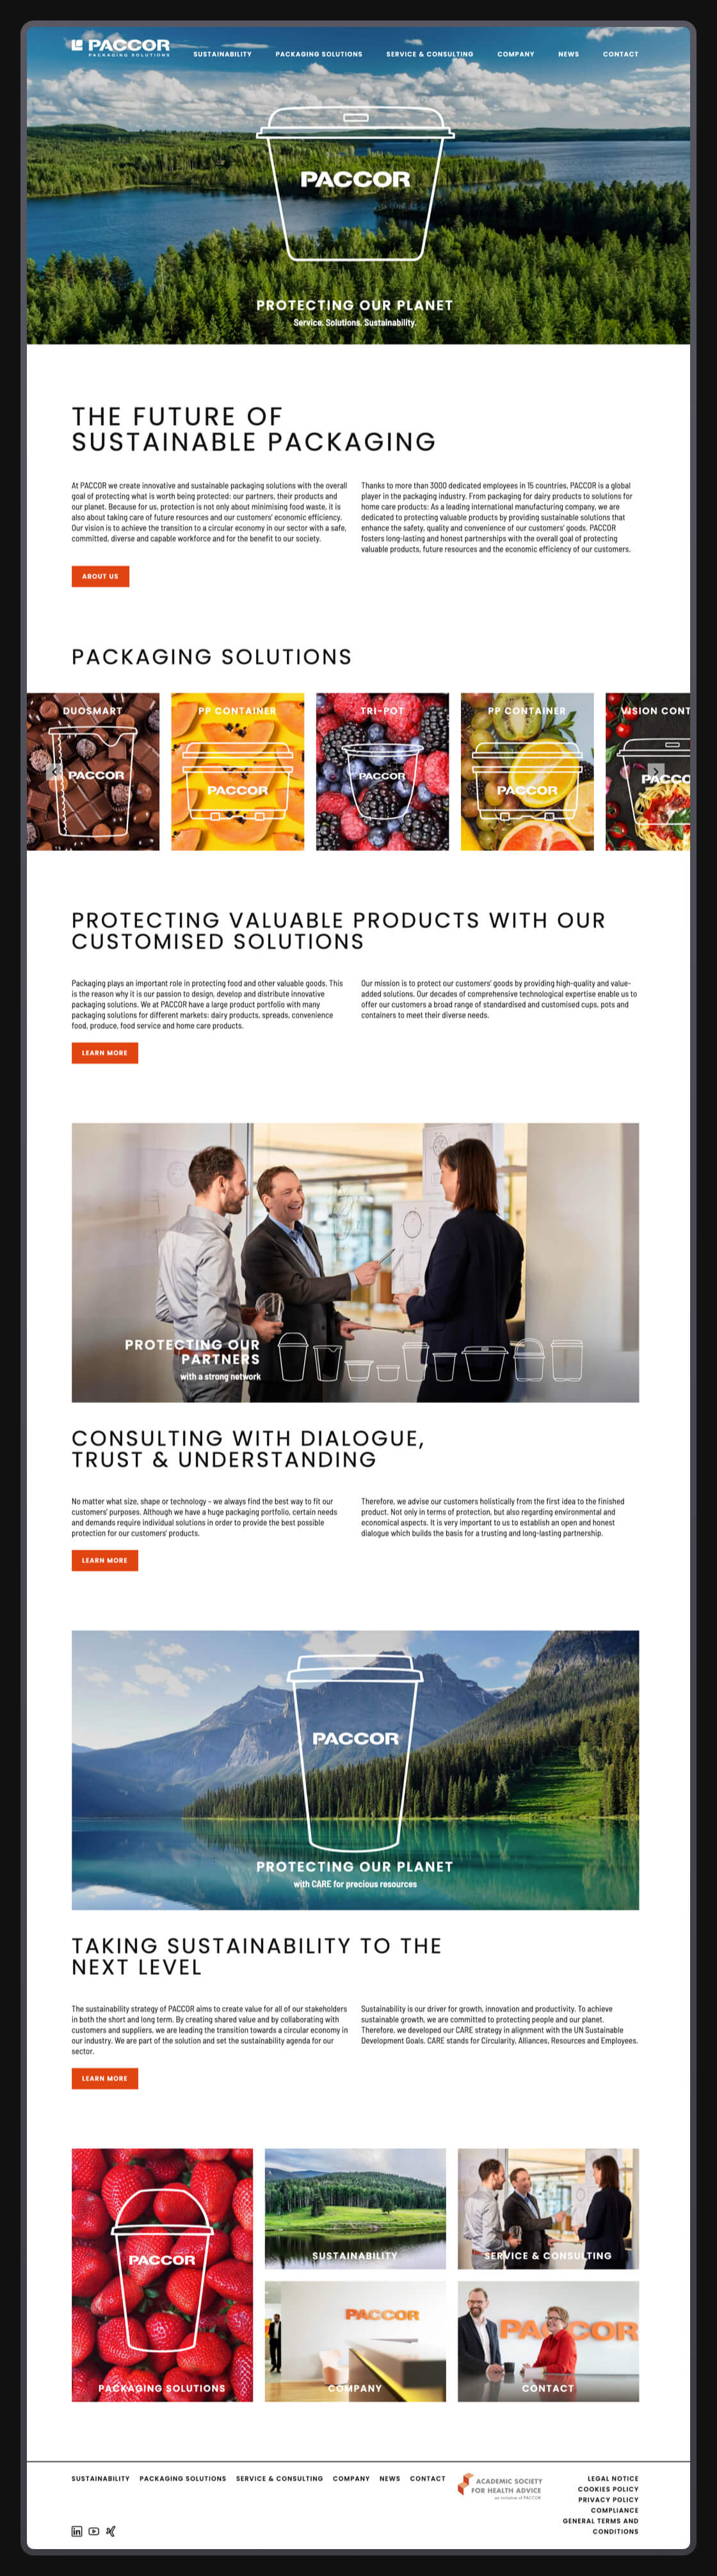  Referenz - PACCOR - Corporate Website